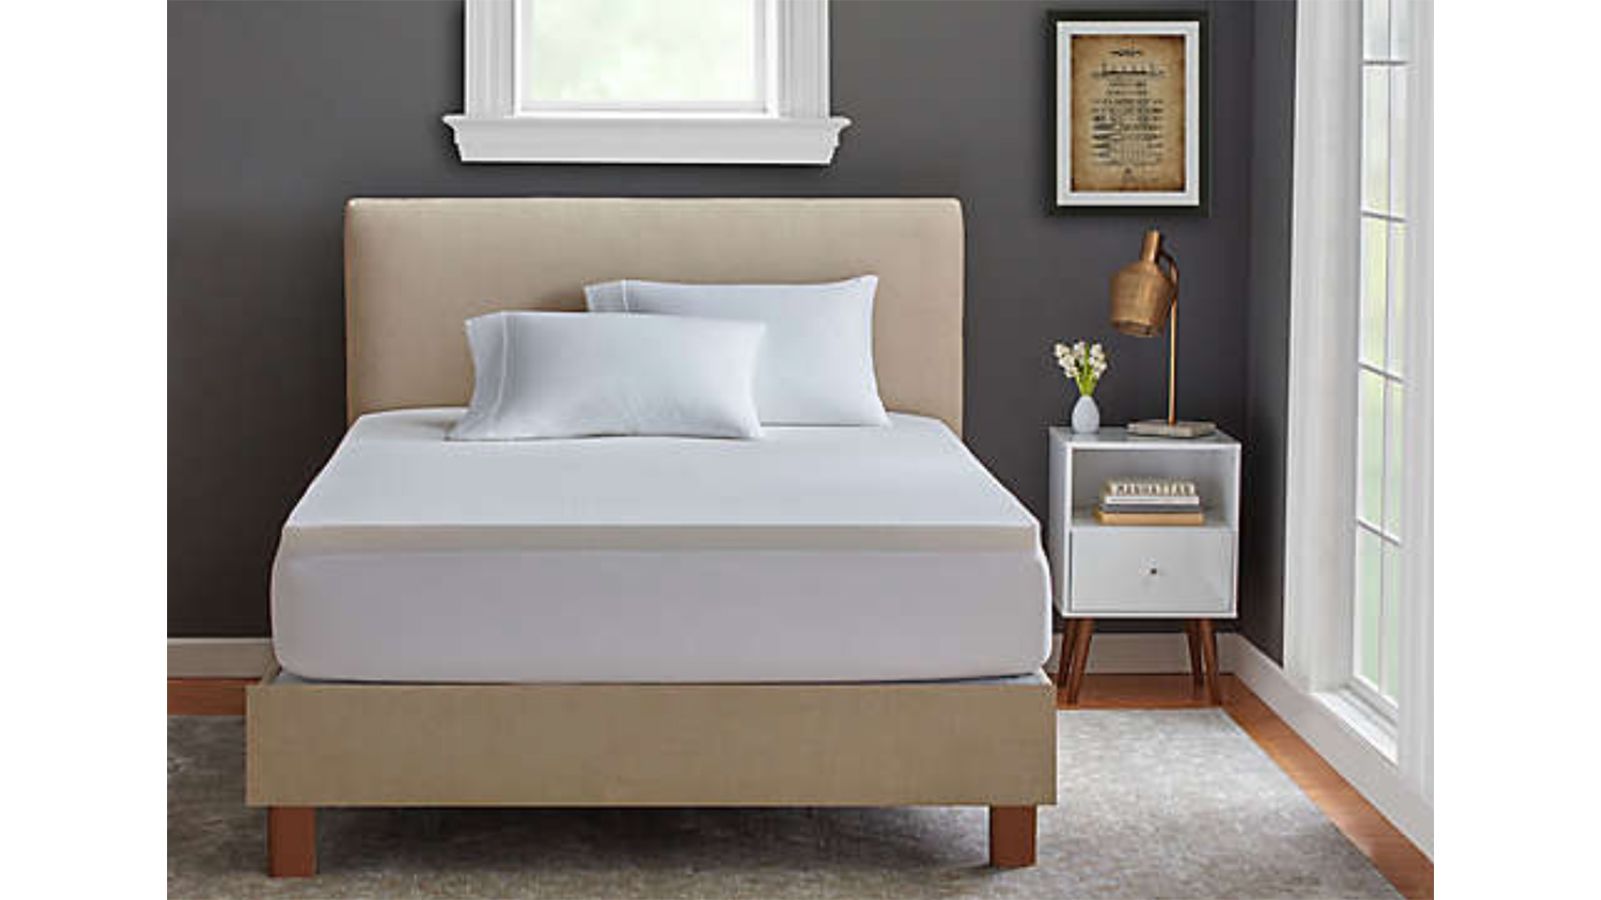 Twin Xl Bedding For Your College Dorm, Bed Bath And Beyond Twin Xl Mattress Pad